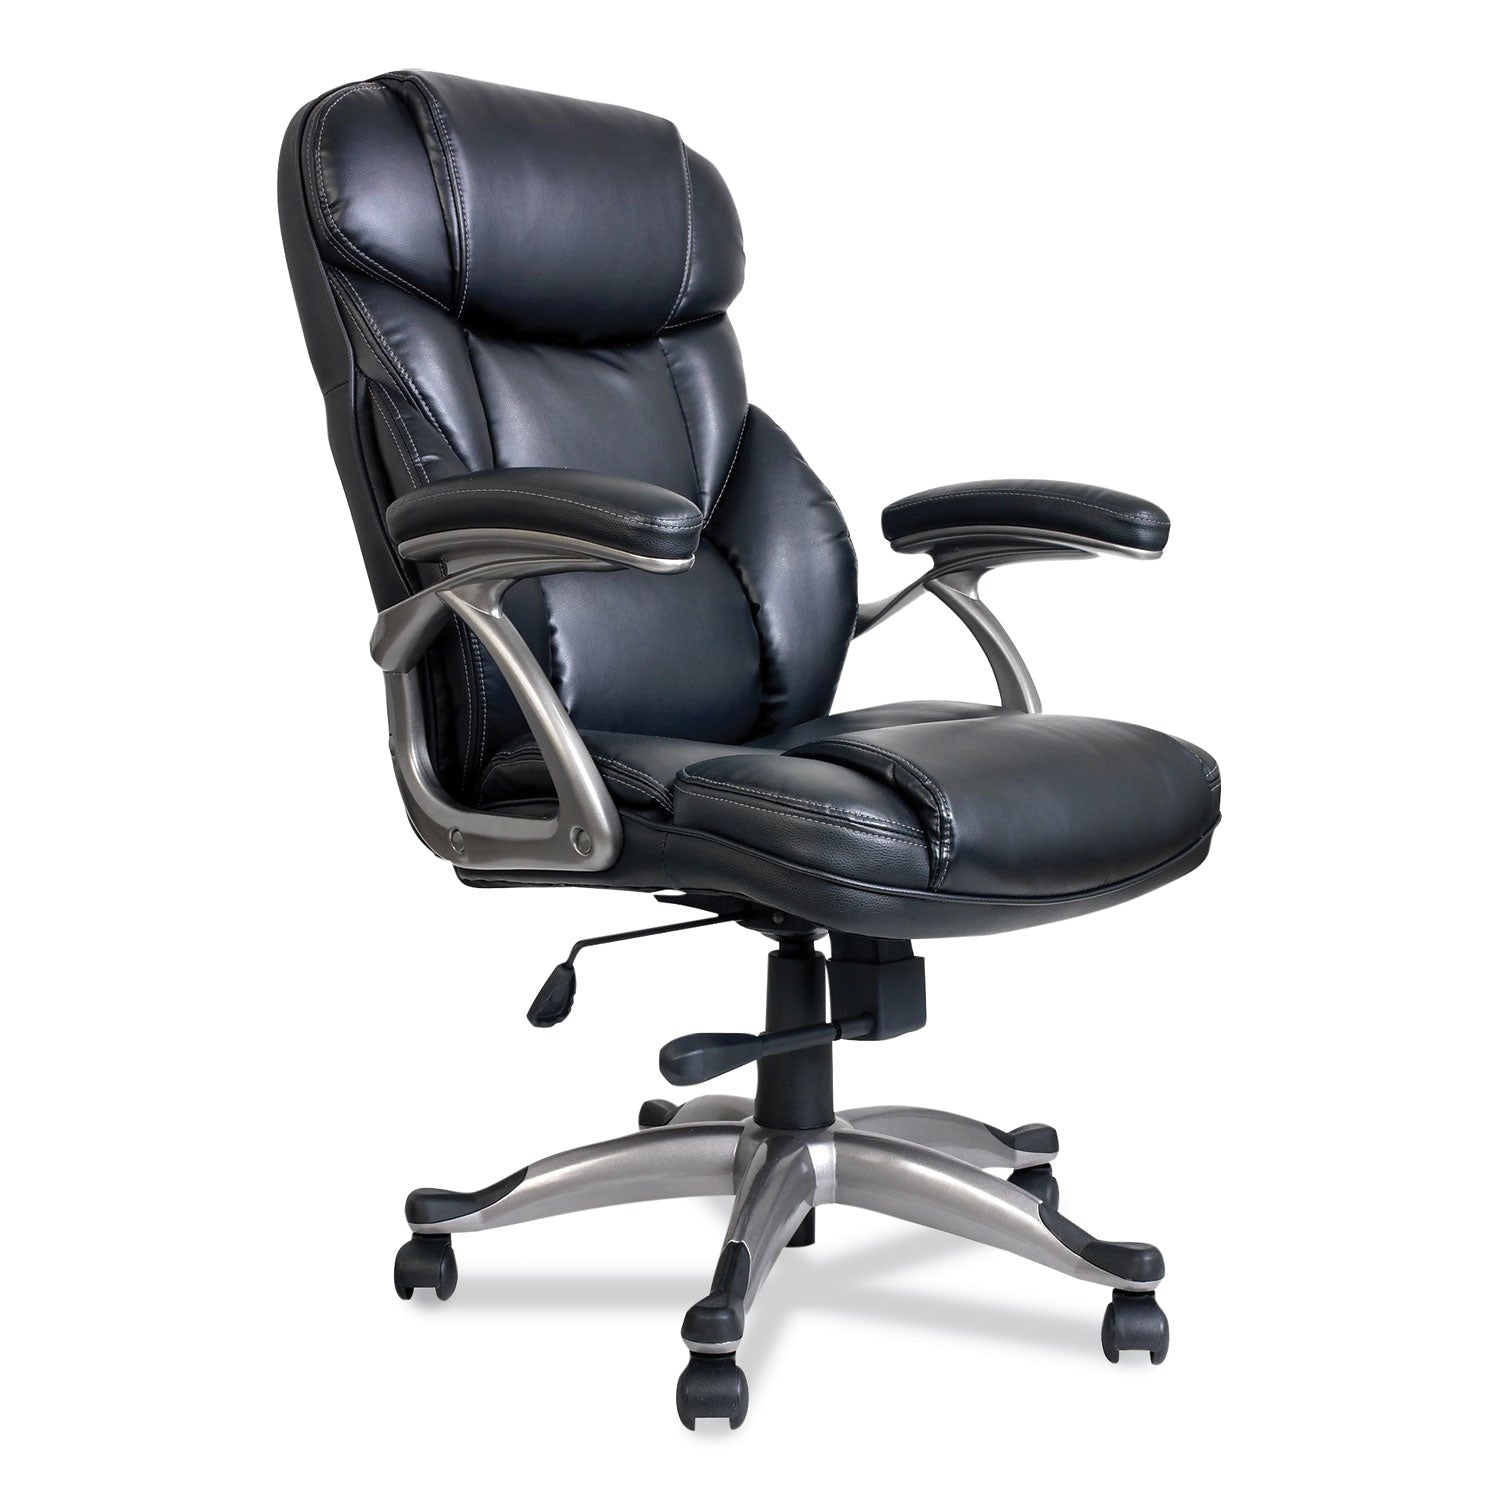 alera-birns-series-high-back-task-chair-supports-up-to-250-lb-1811-to-2205-seat-height-black-seat-back-chrome-base_alebn41b19 - 2